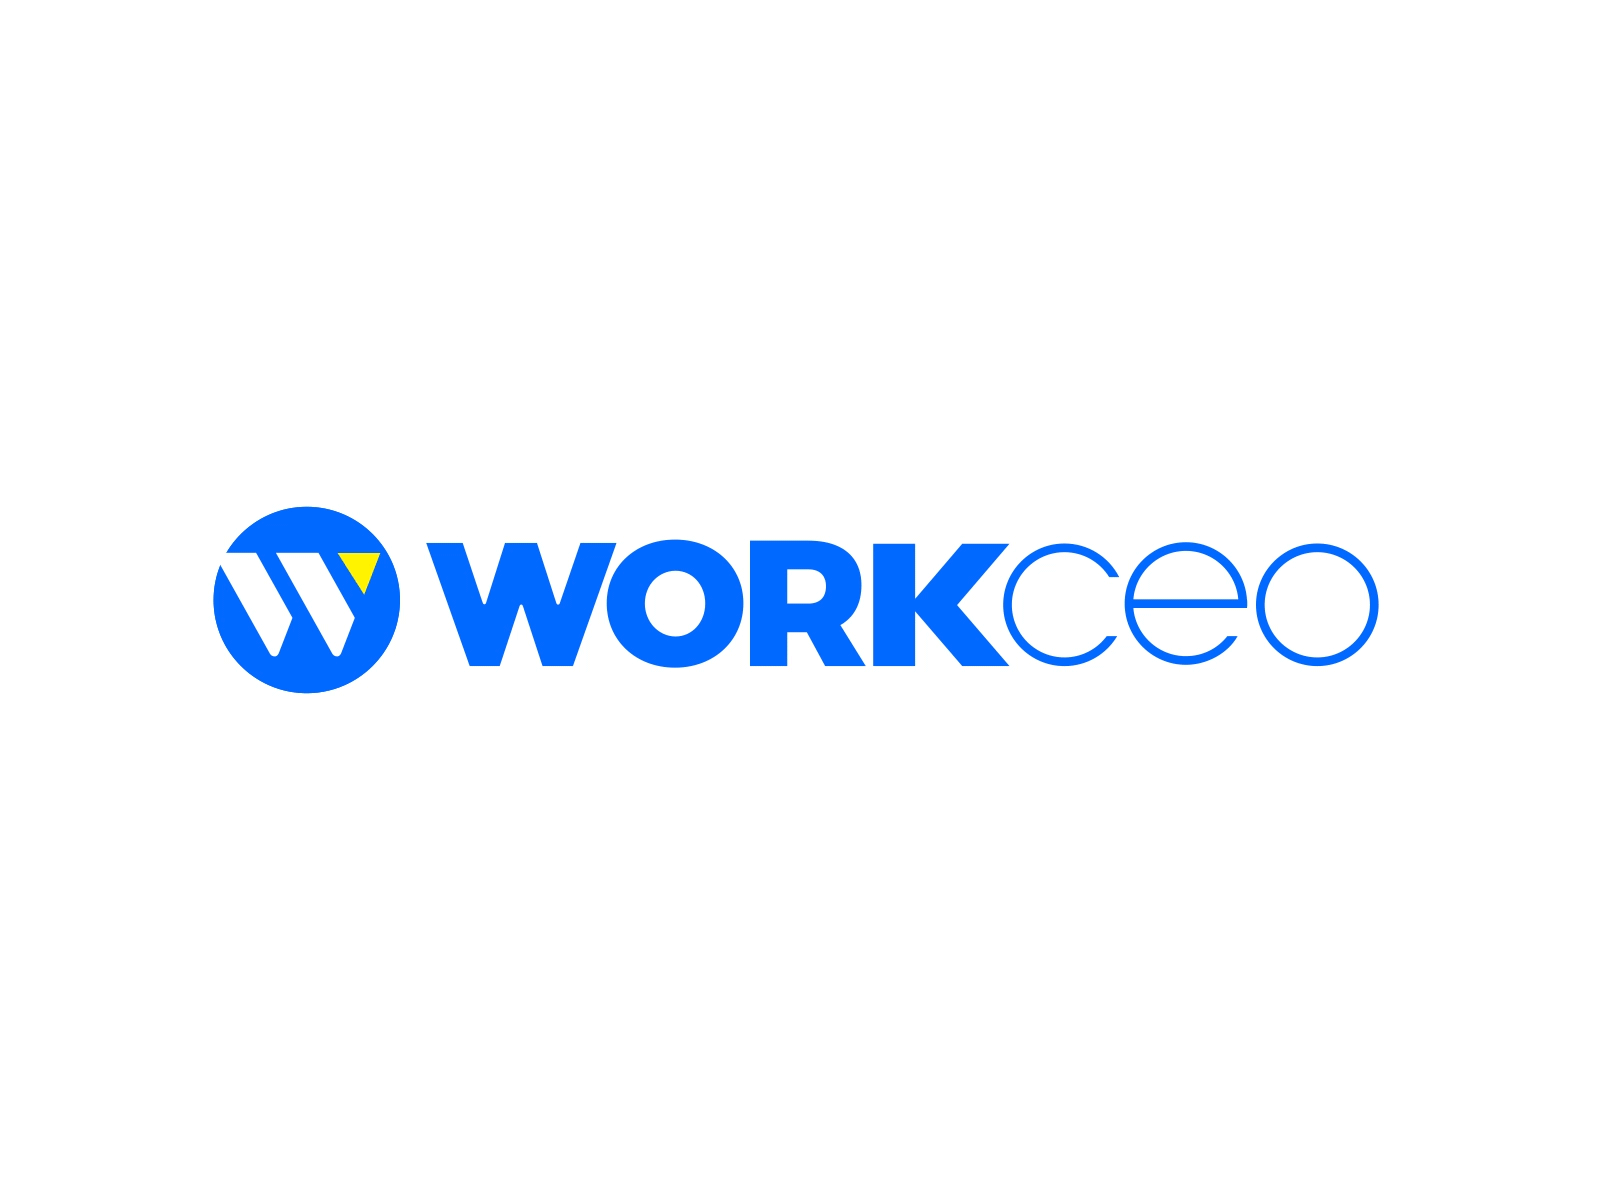 Workceo logo animation by MATEEFFECTS on Dribbble